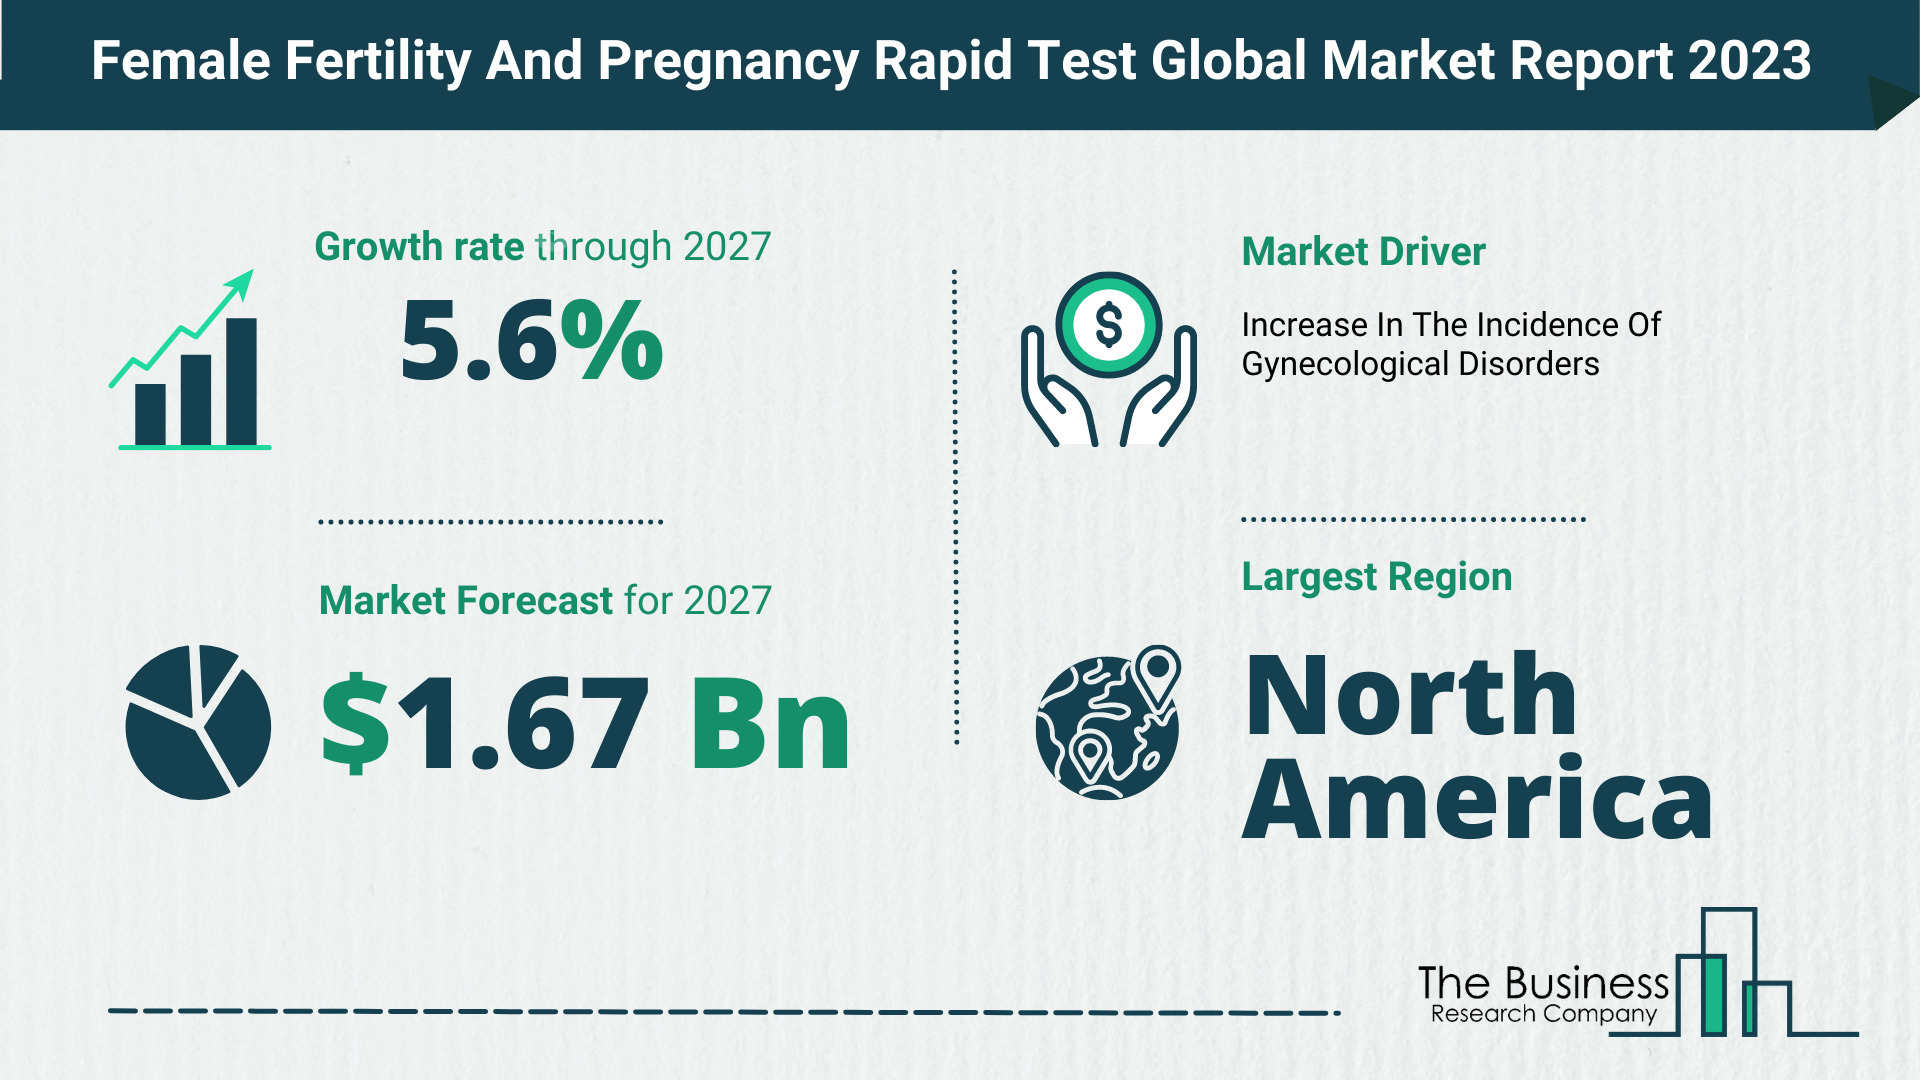 Female Fertility And Pregnancy Rapid Test Market Forecast 2023-2027 By The Business Research Company